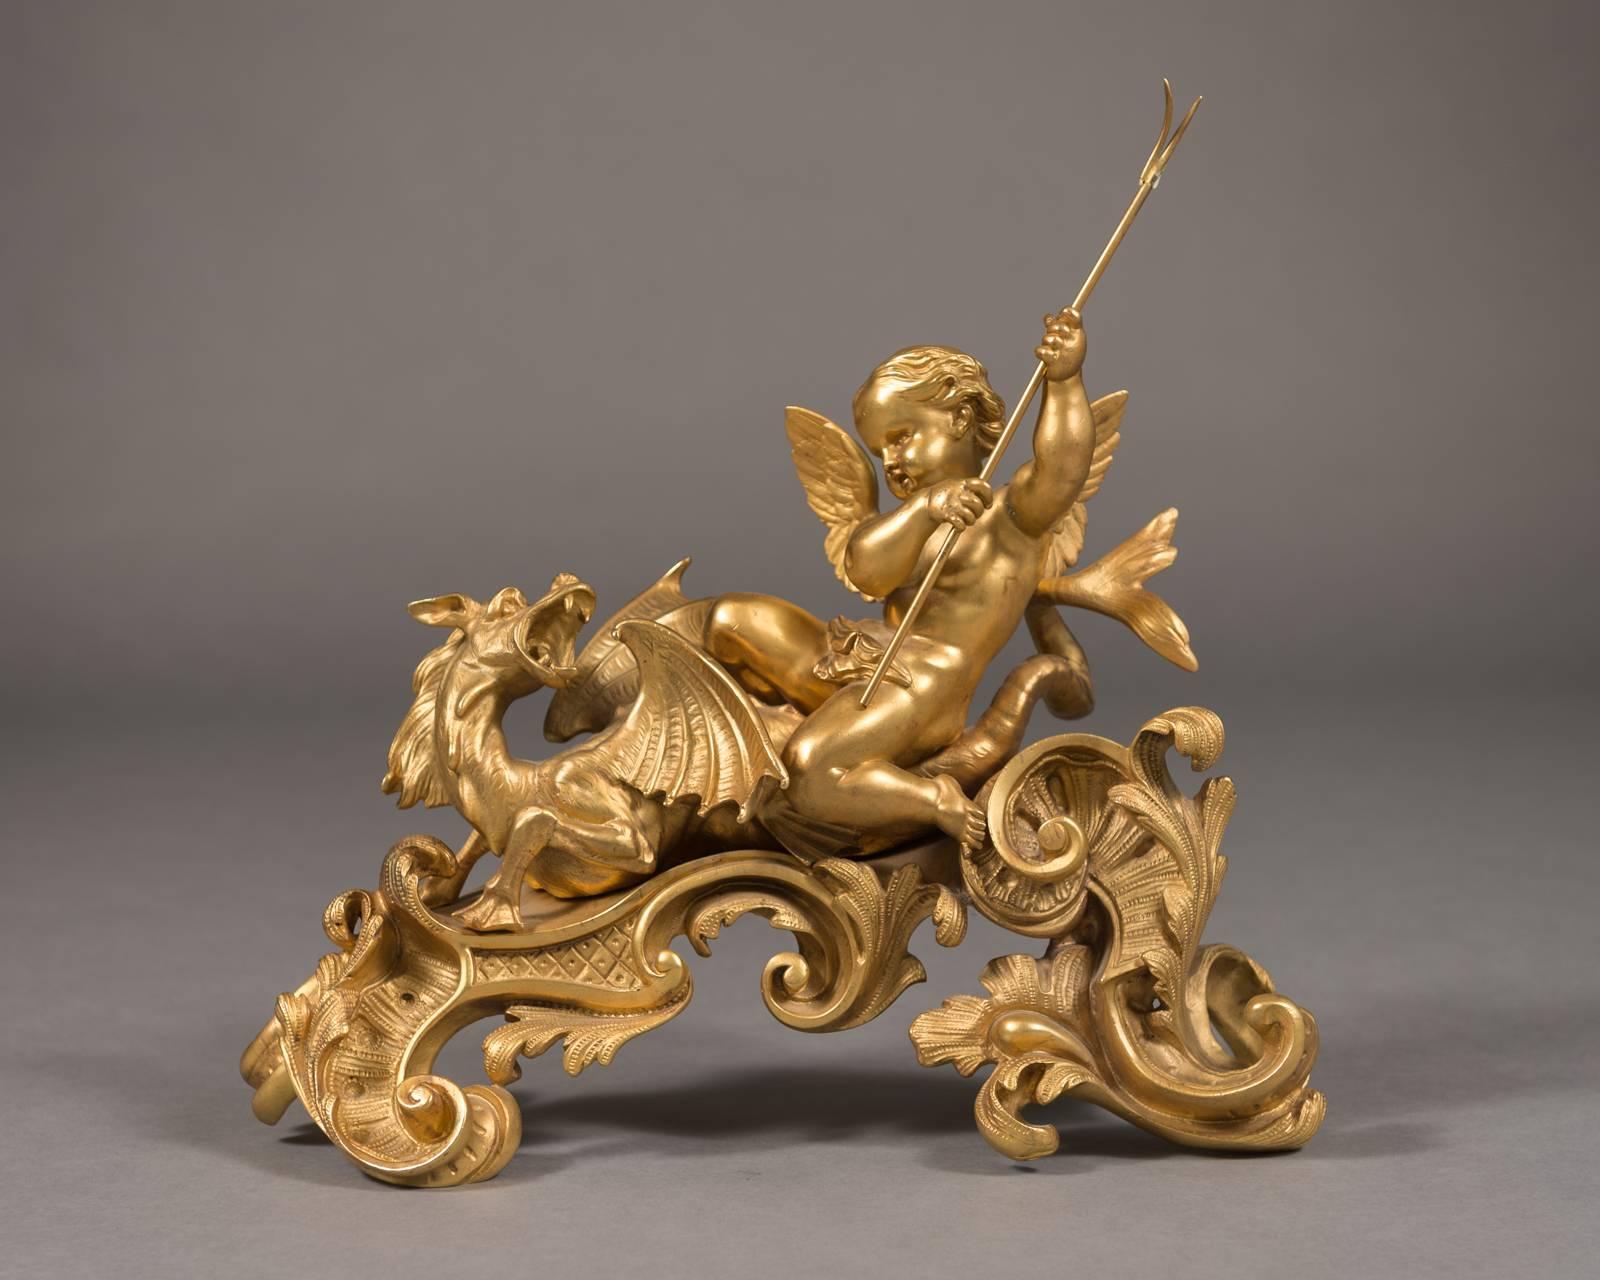 Rococo Fine Pair 19th Century French Figural Chenets Depicting Cherubs and Dragons